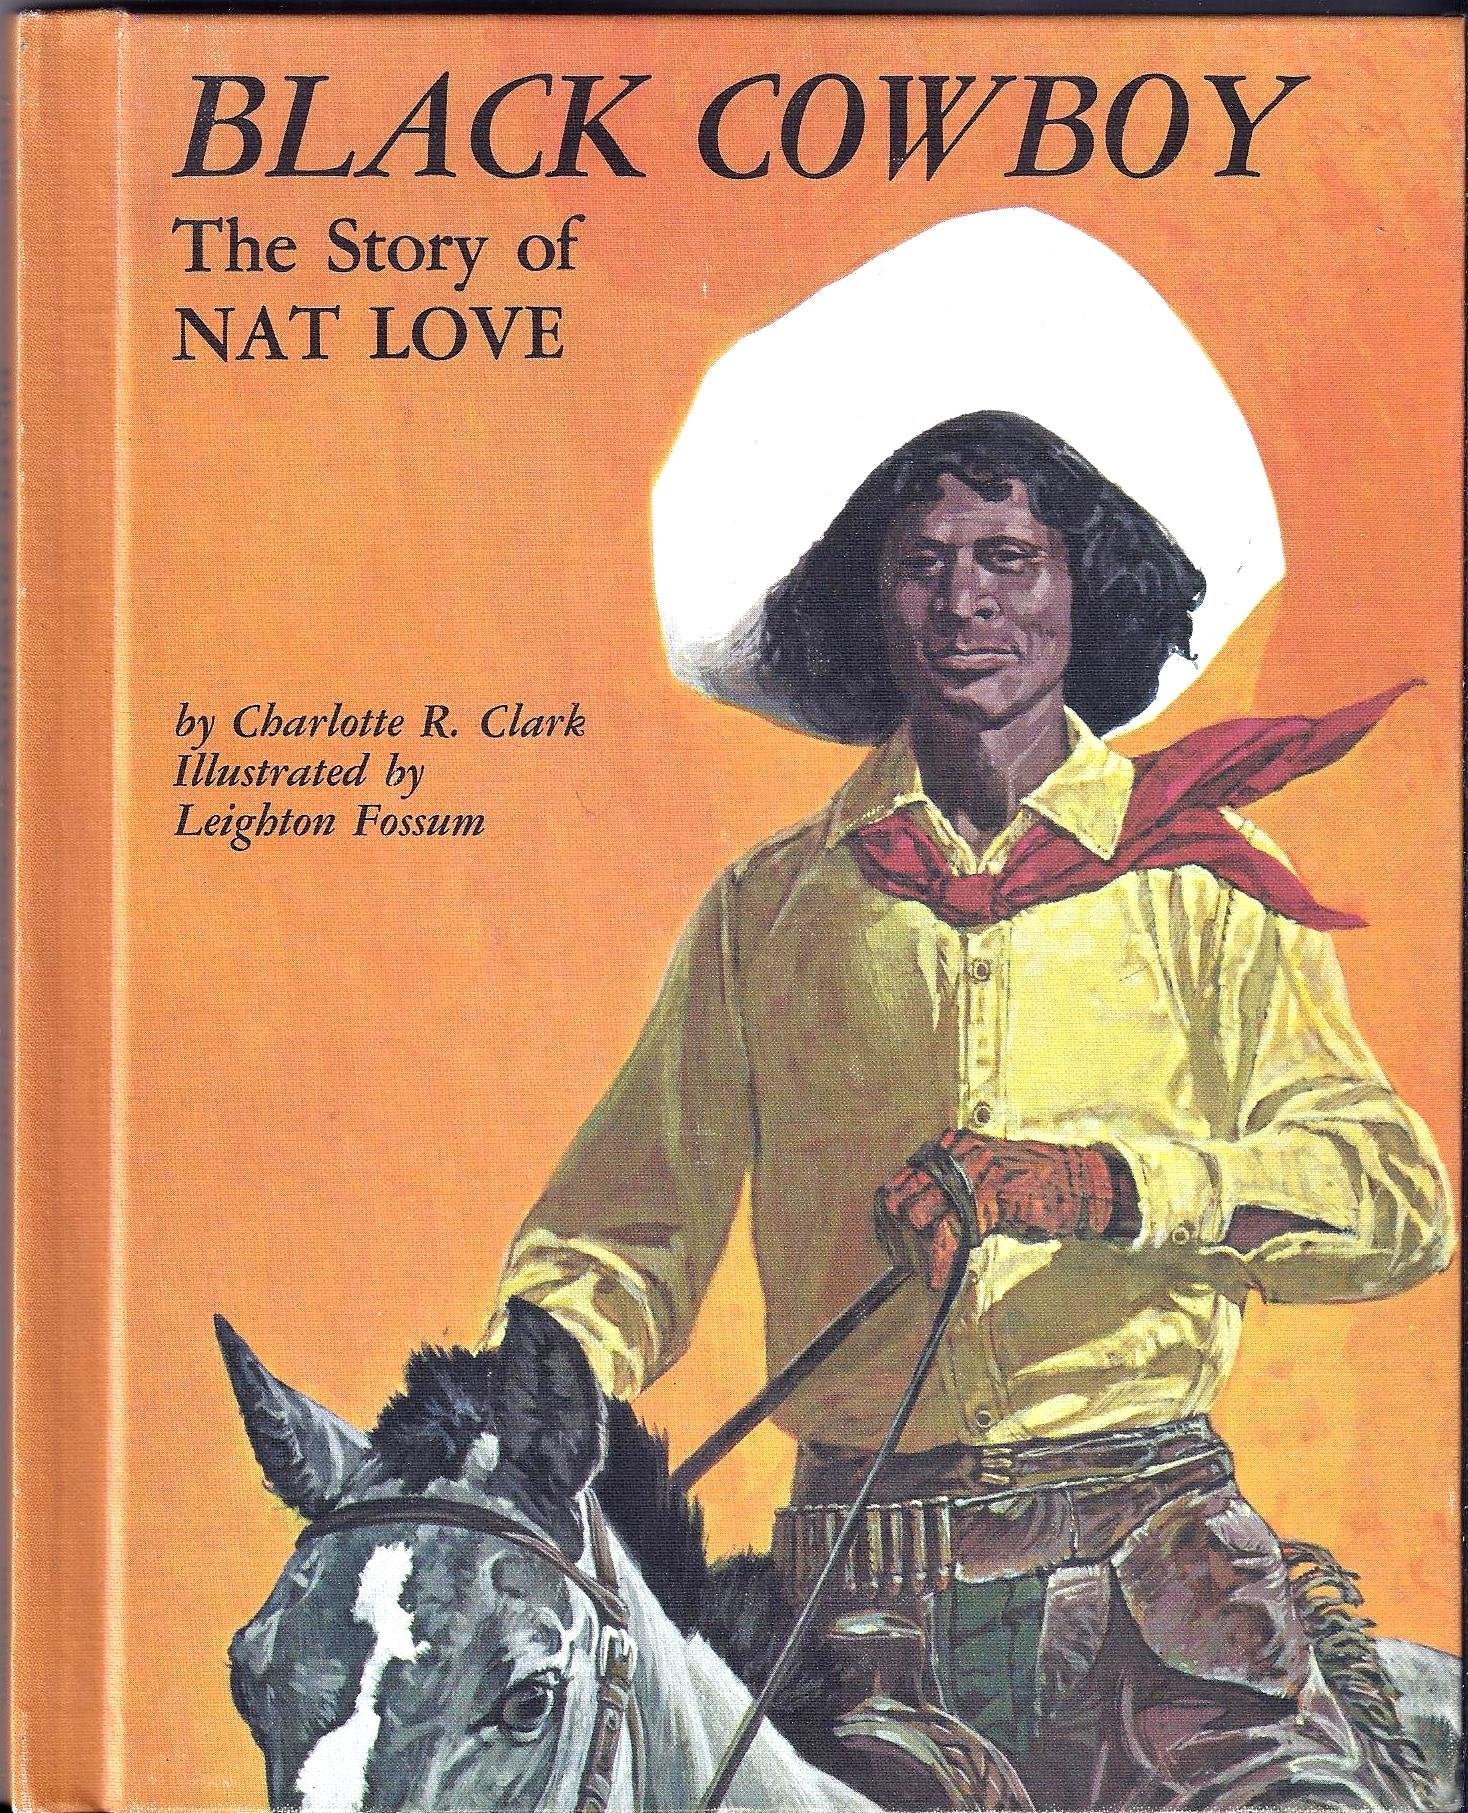 Meet The Real-Life Figures Depicted In The Black Western ‘The Harder They Fall’